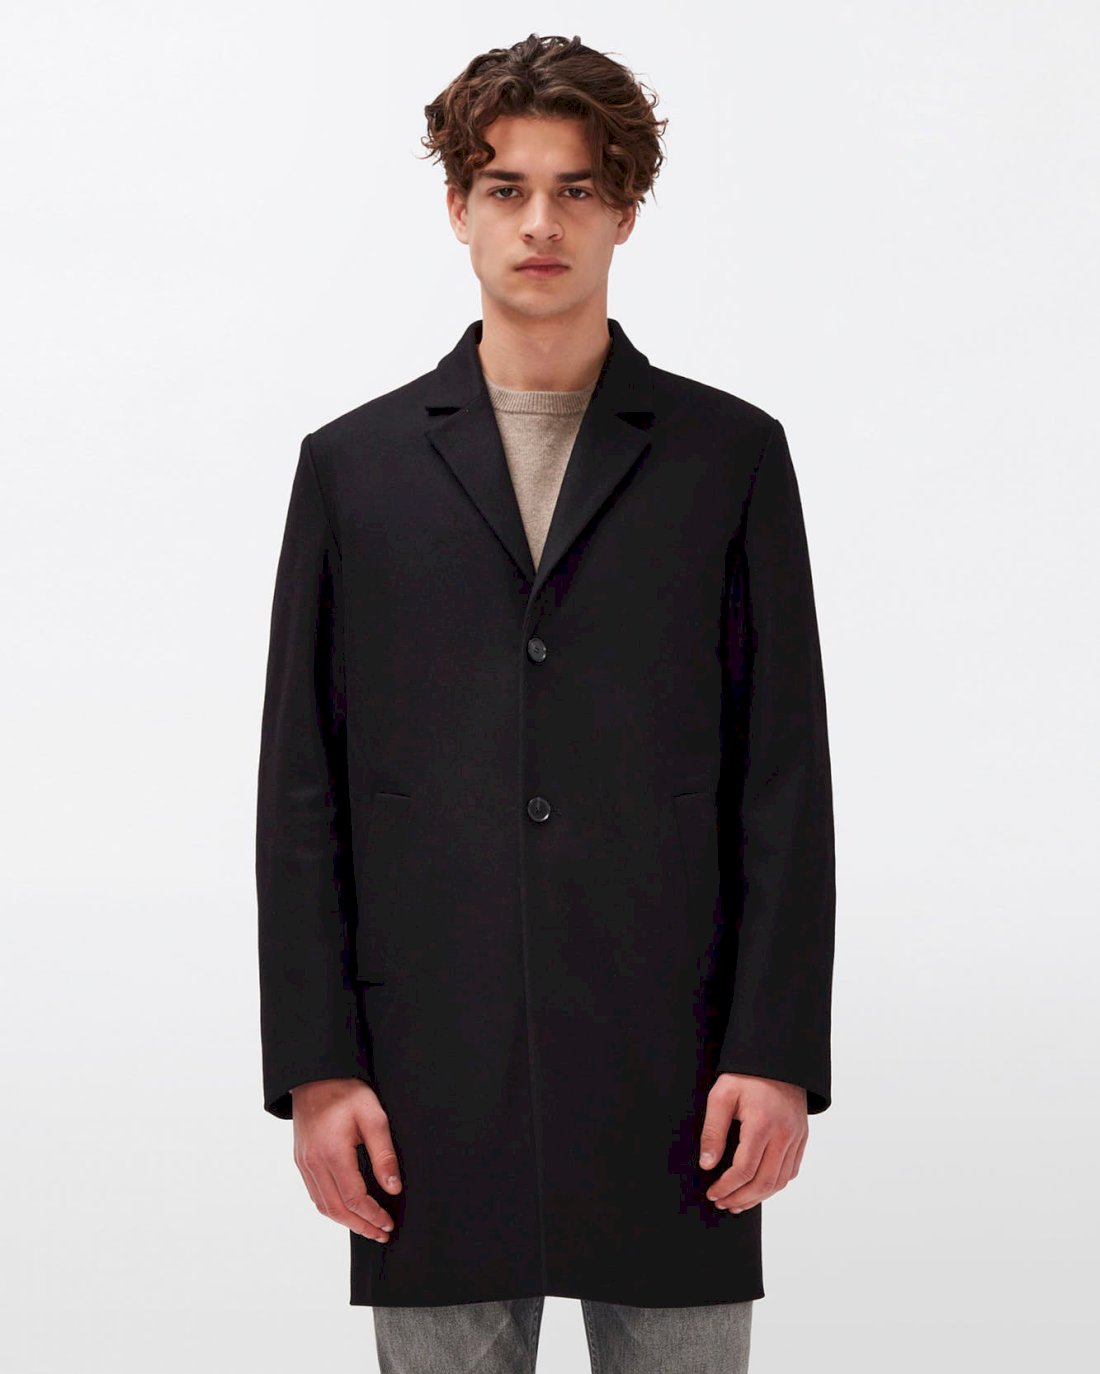 Wool Overcoat in Black | 7 For All Mankind